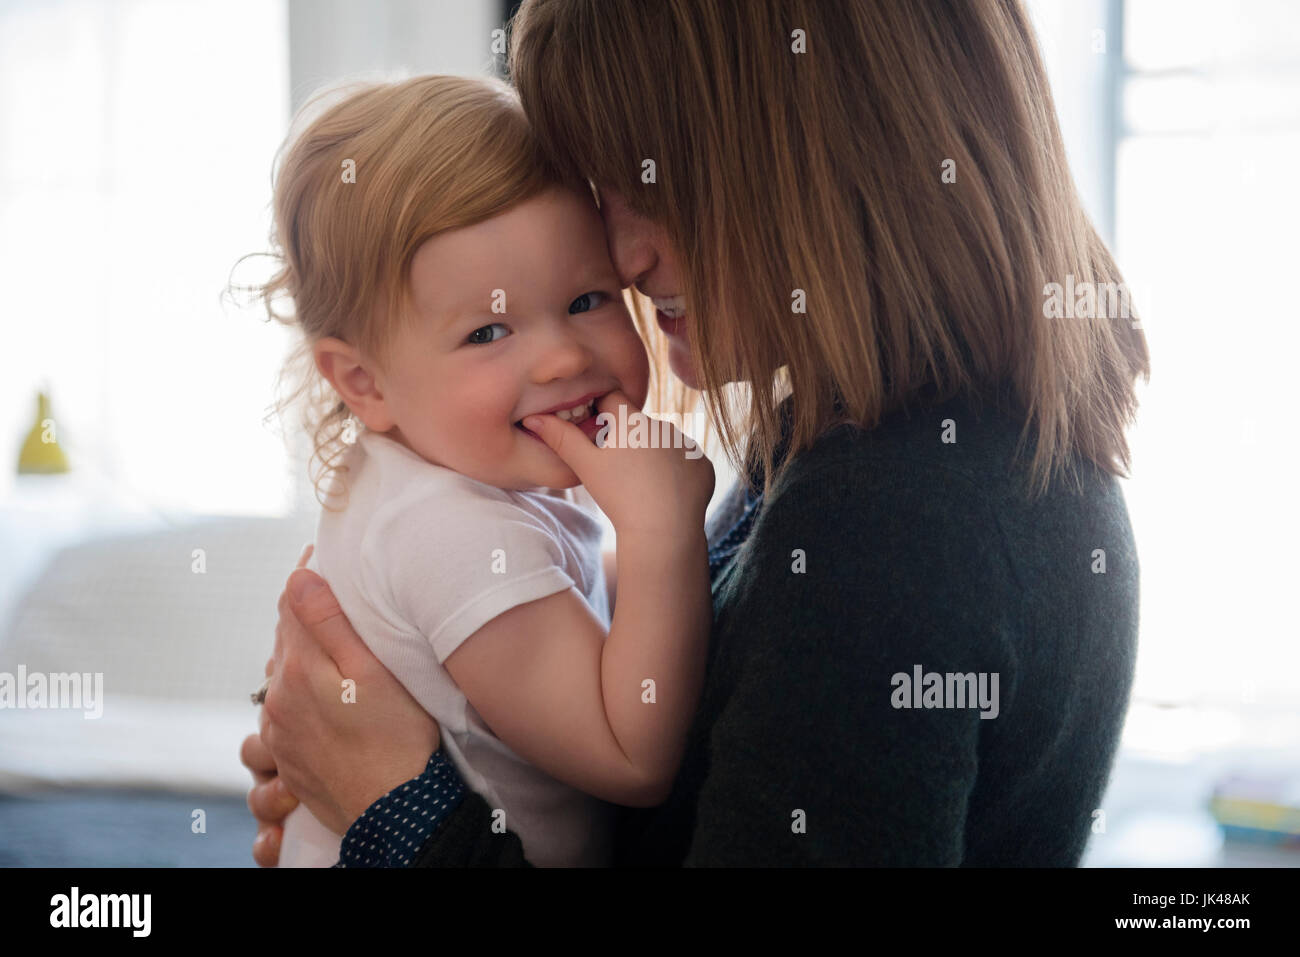 Caucasian mother holding smiling daughter Stock Photo